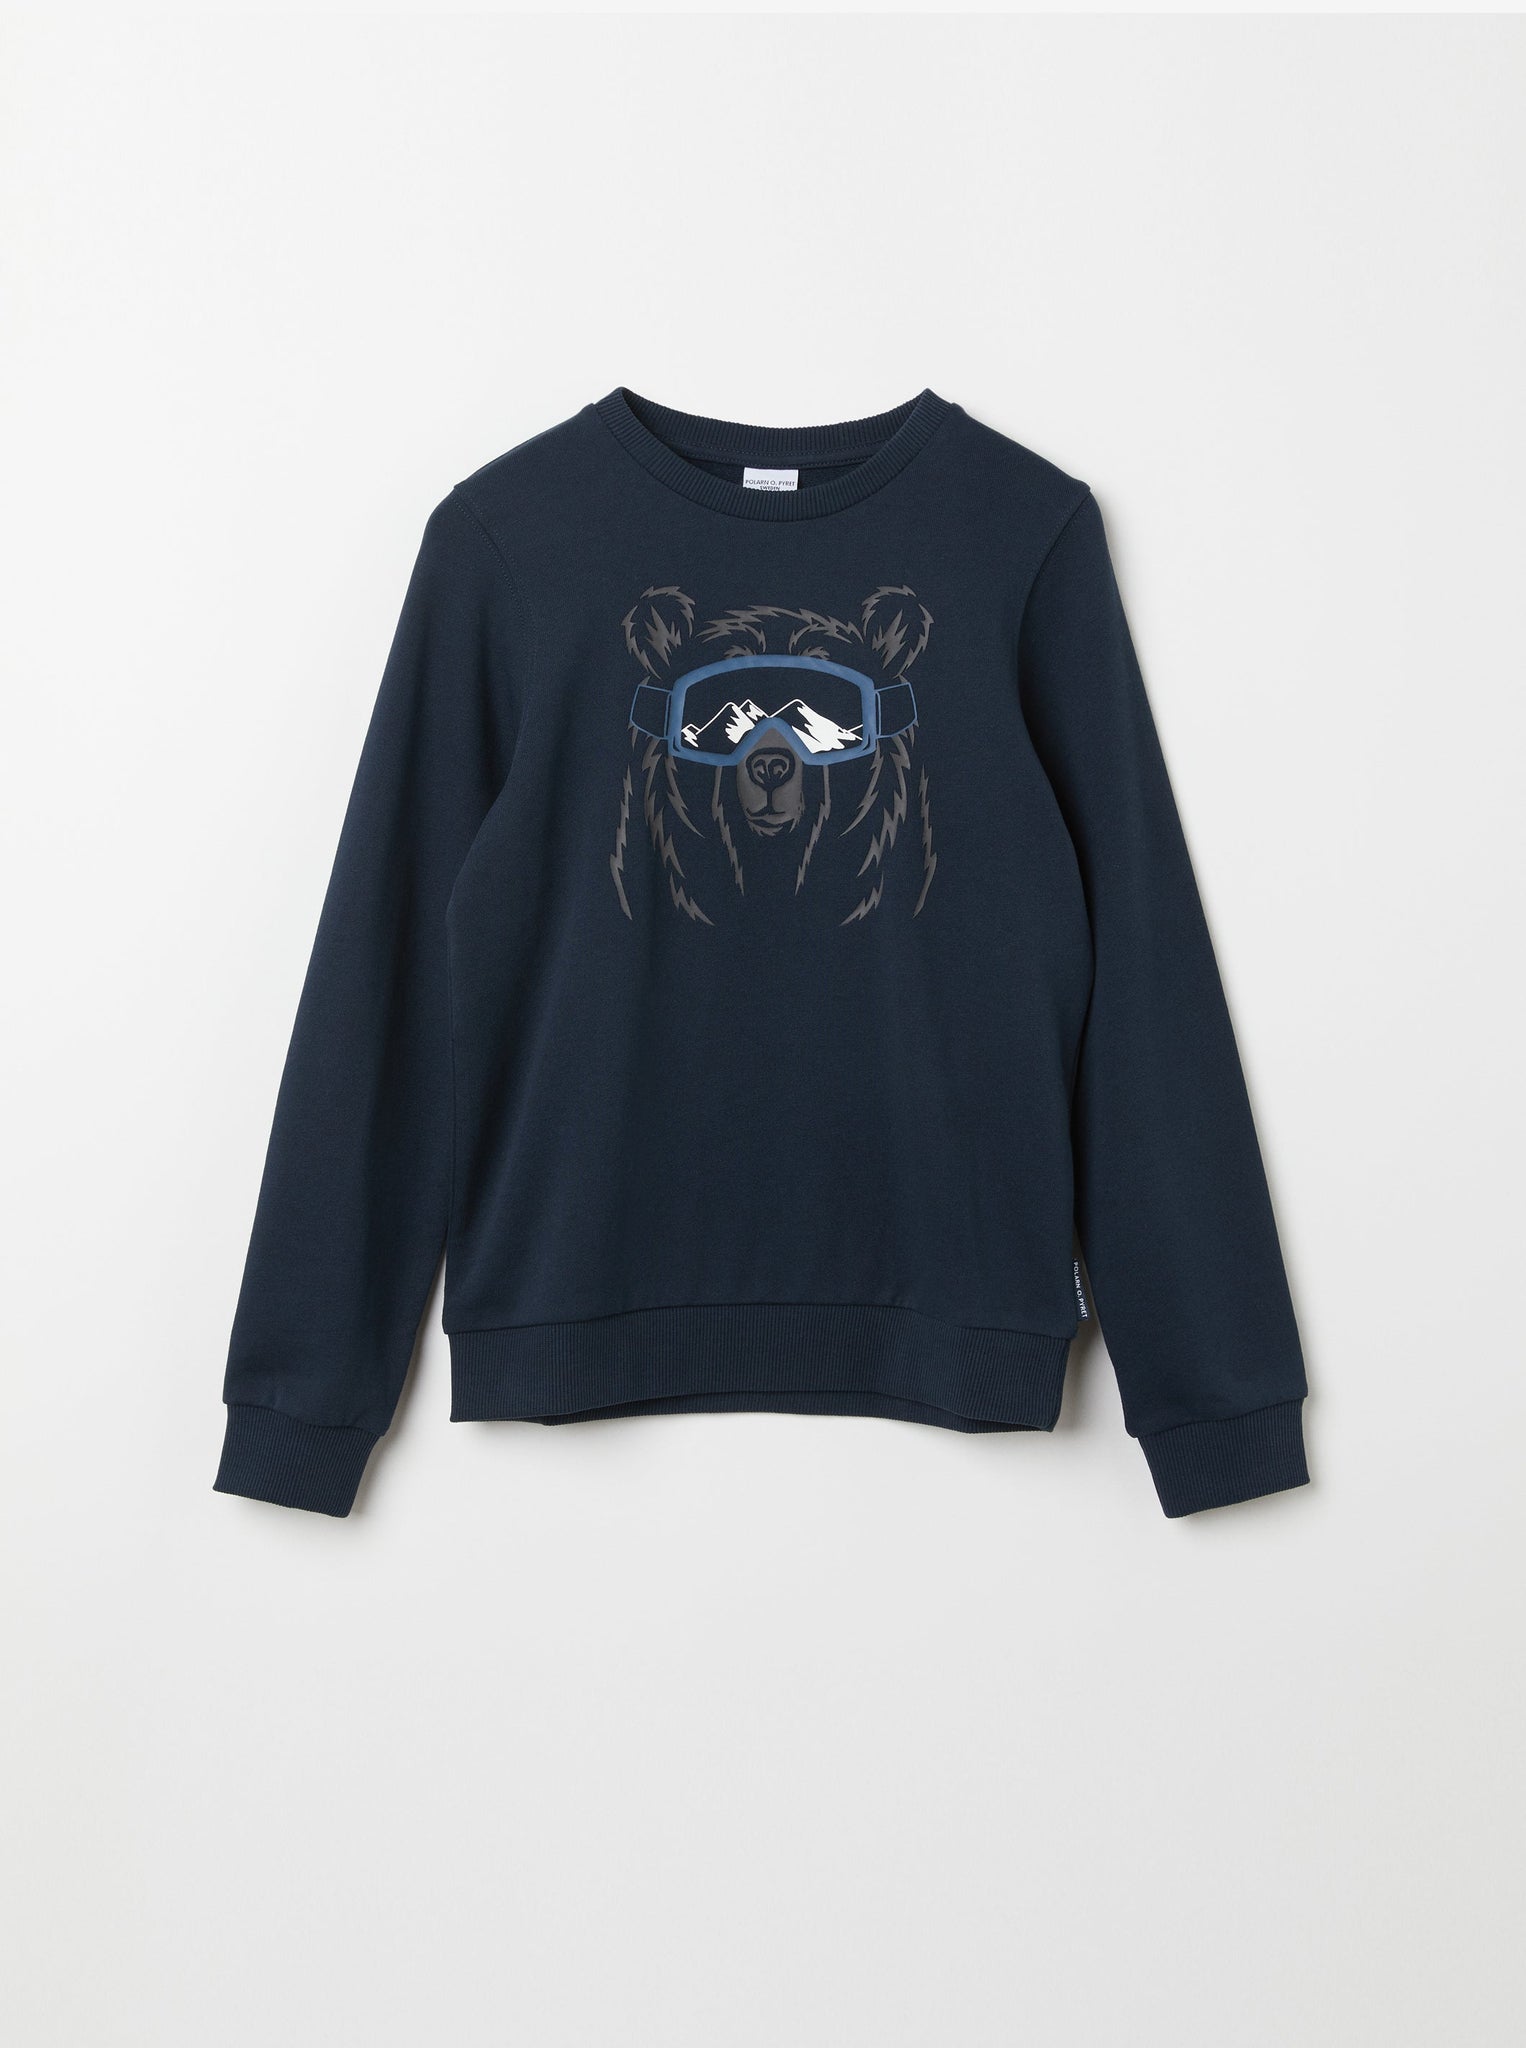 Cotton Bear Print Kids Sweatshirt from the Polarn O. Pyret kidswear collection. The best ethical kids clothes